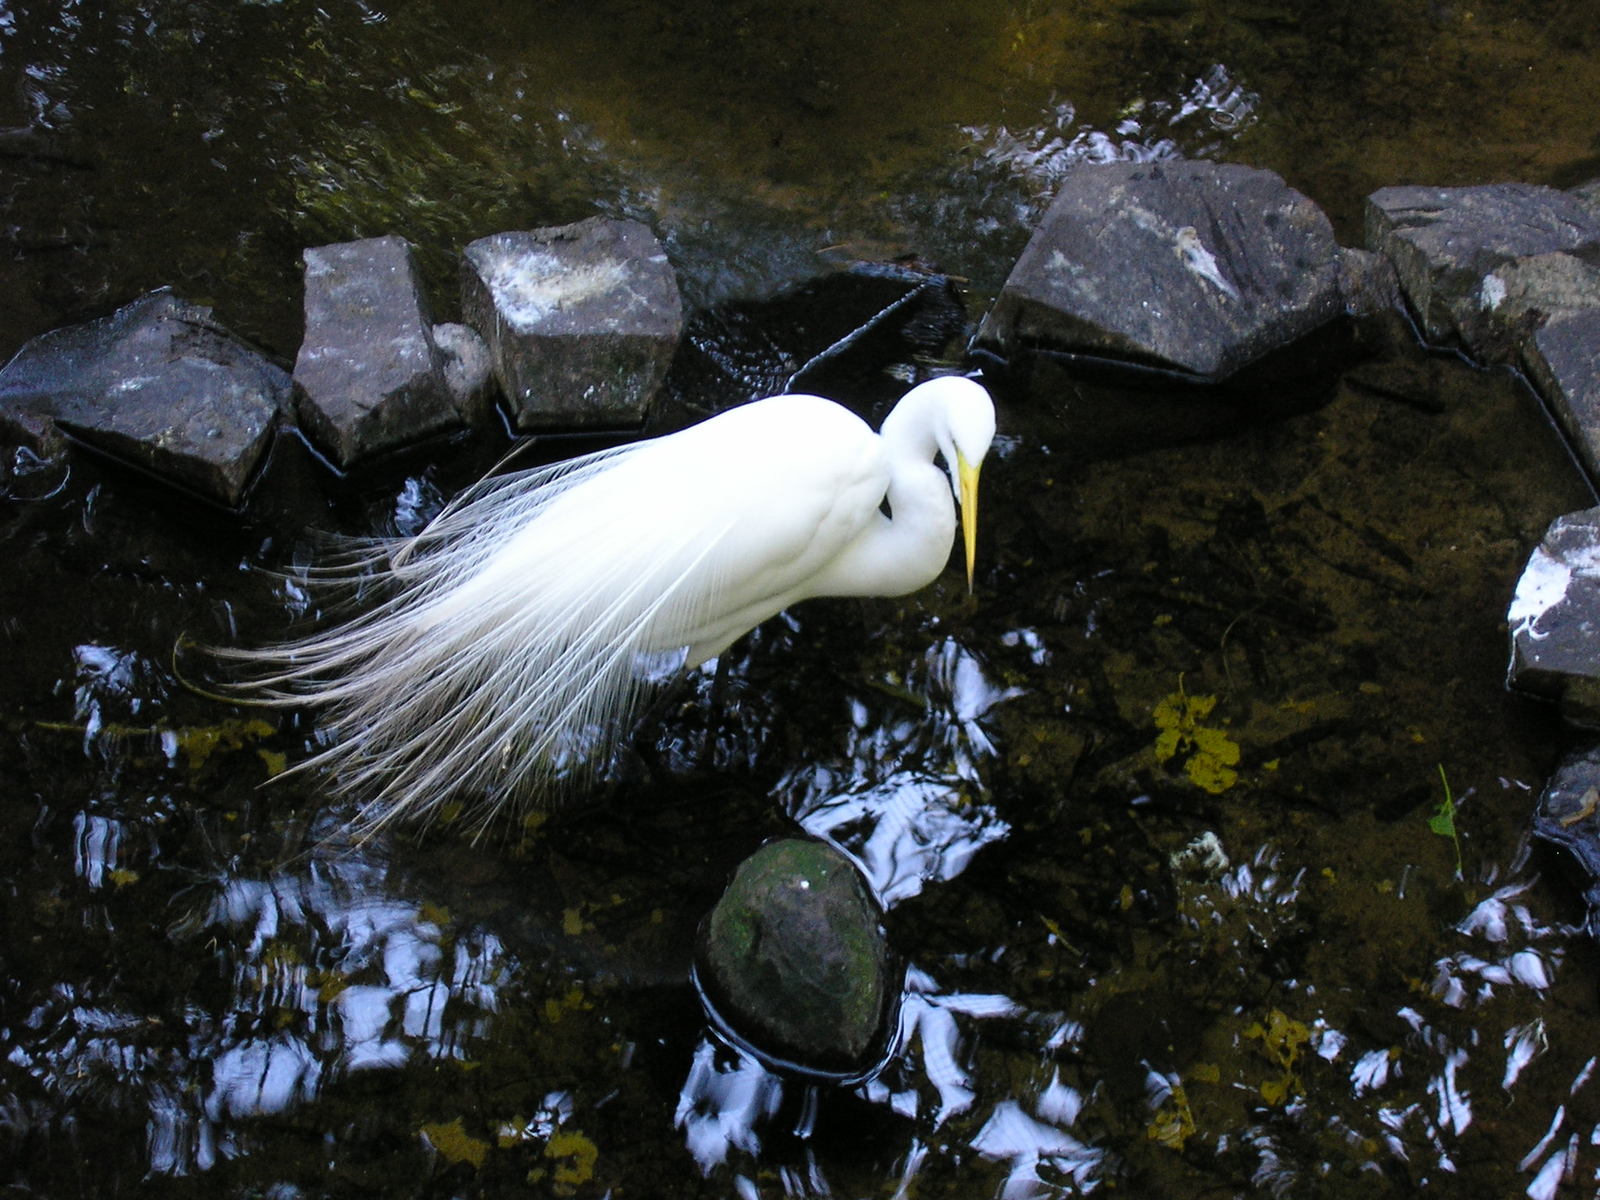 a white bird is in the water by some rocks